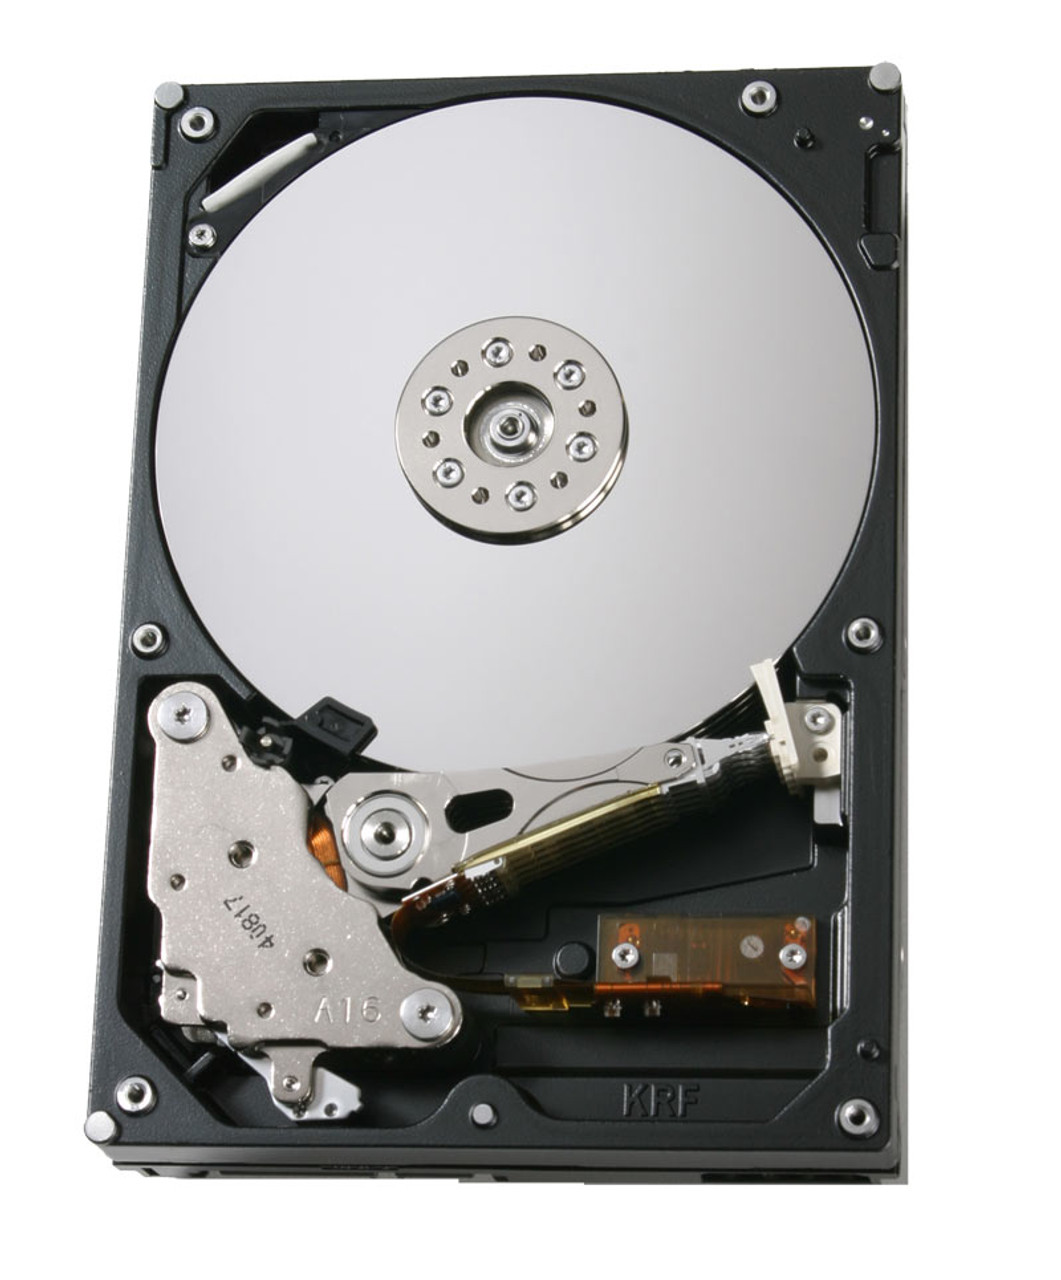 【パーツ】3.5 SATA 3TB 1台 正常 Hitachi HDS723030ALA640 使用時間71186H ■HDD1488